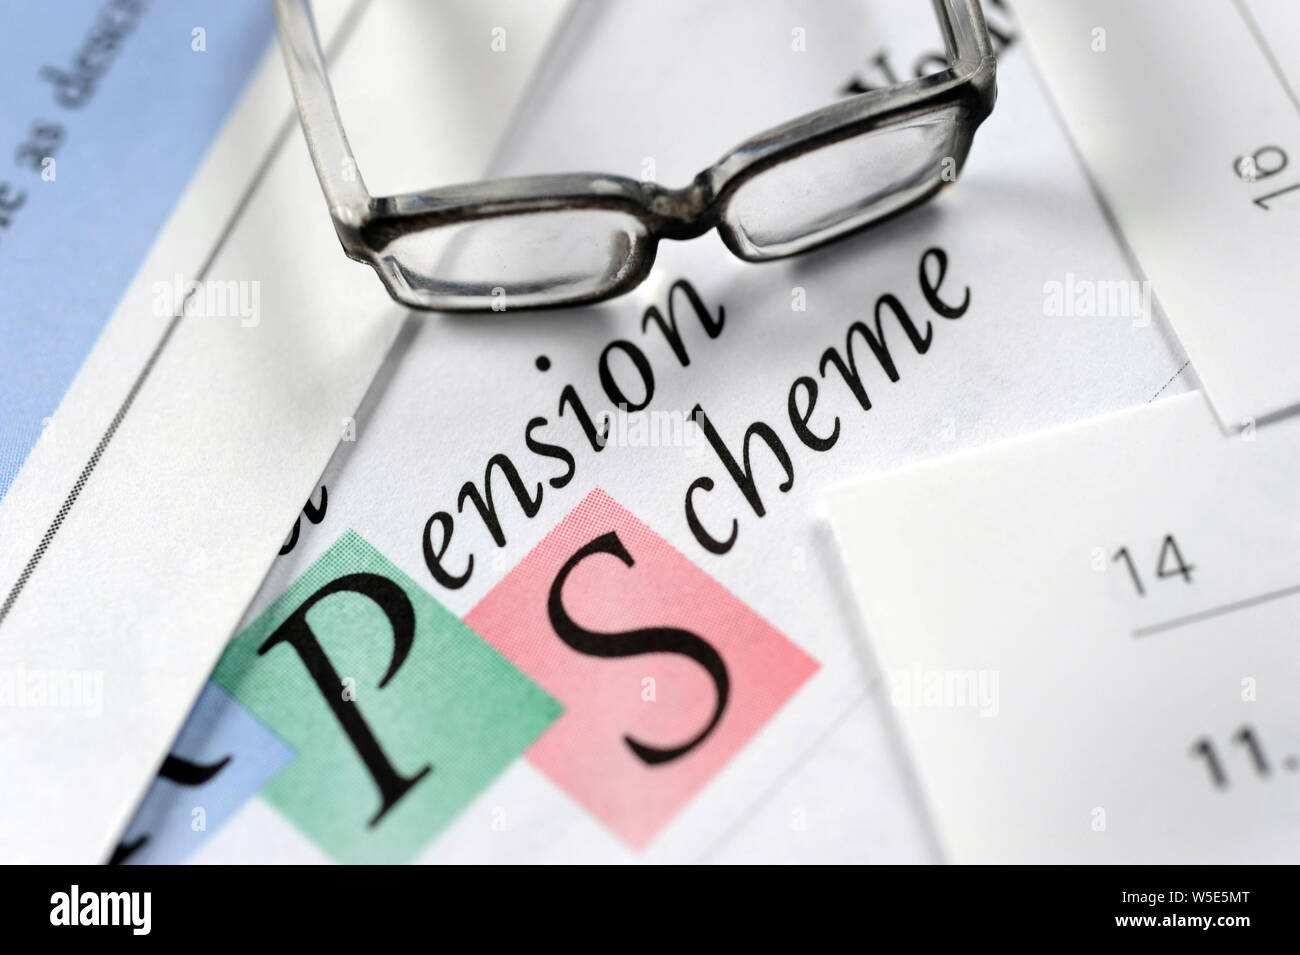 COMPANY PENSION SCHEME DOCUMENTS WITH GLASSES RE PRIVATE PENSIONS RETIREMENT INCOME SAVINGS ETC UK Stock Photo